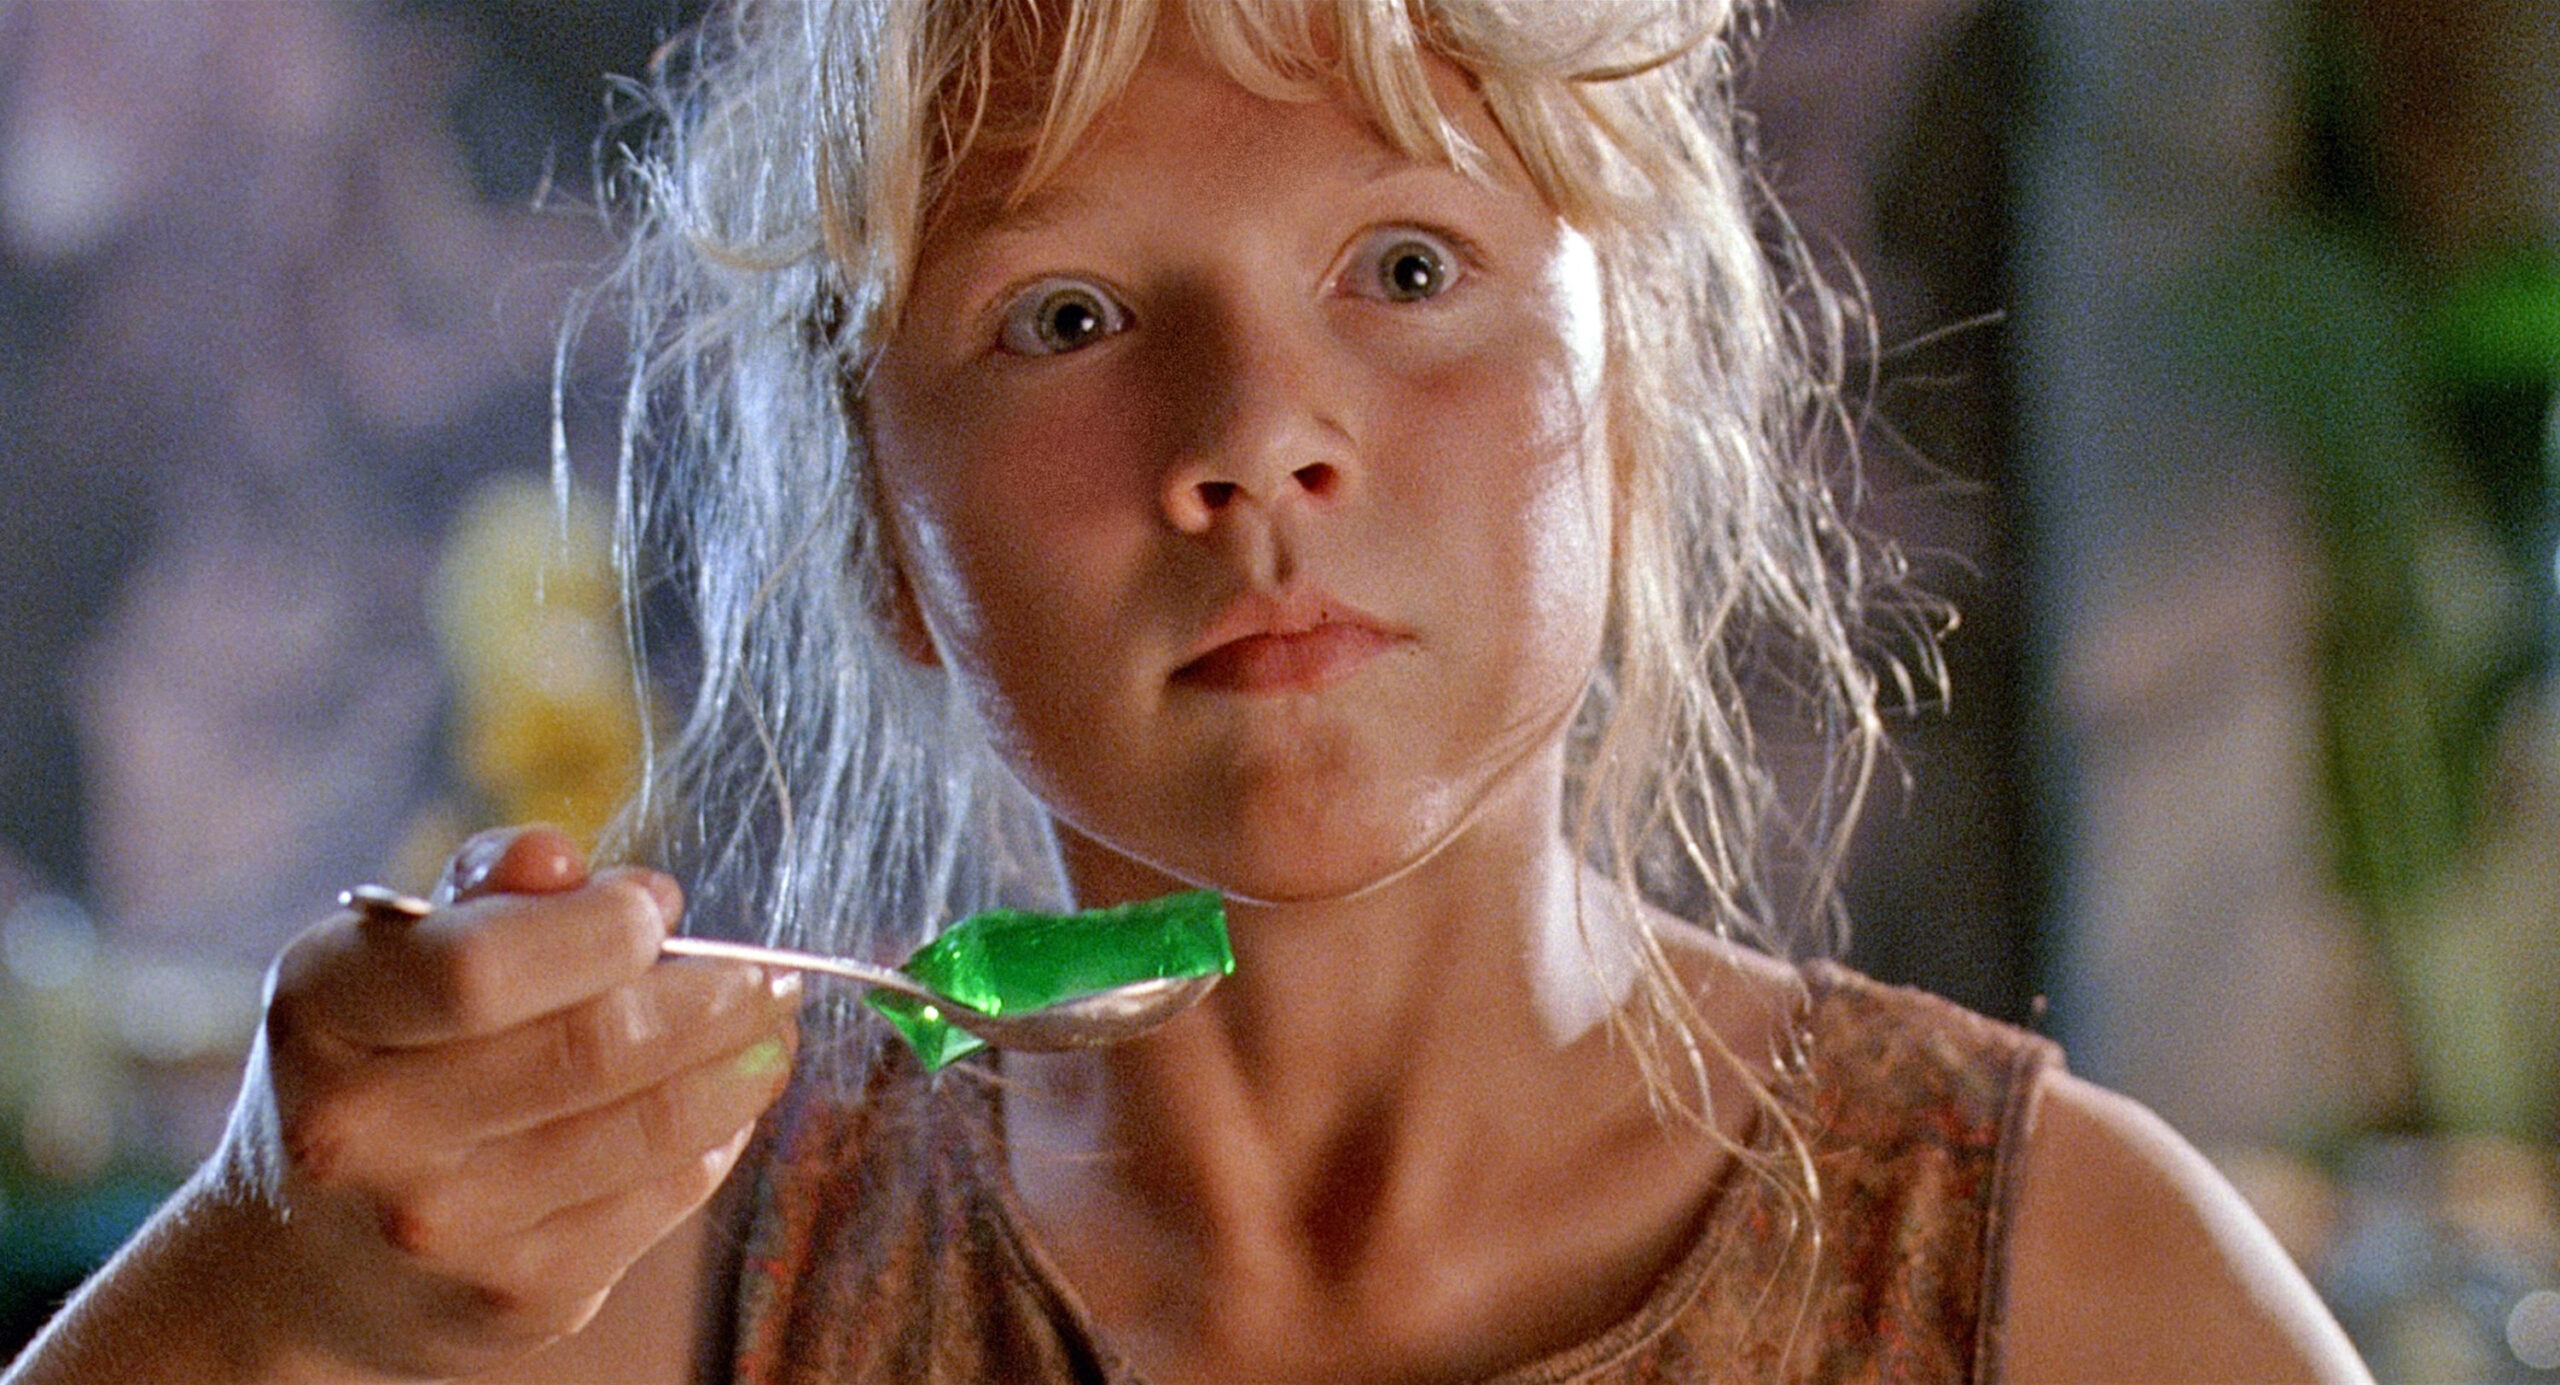 Ariana Richards Recreated The Iconic Jurassic Park Jello Scene and Now I Feel Old